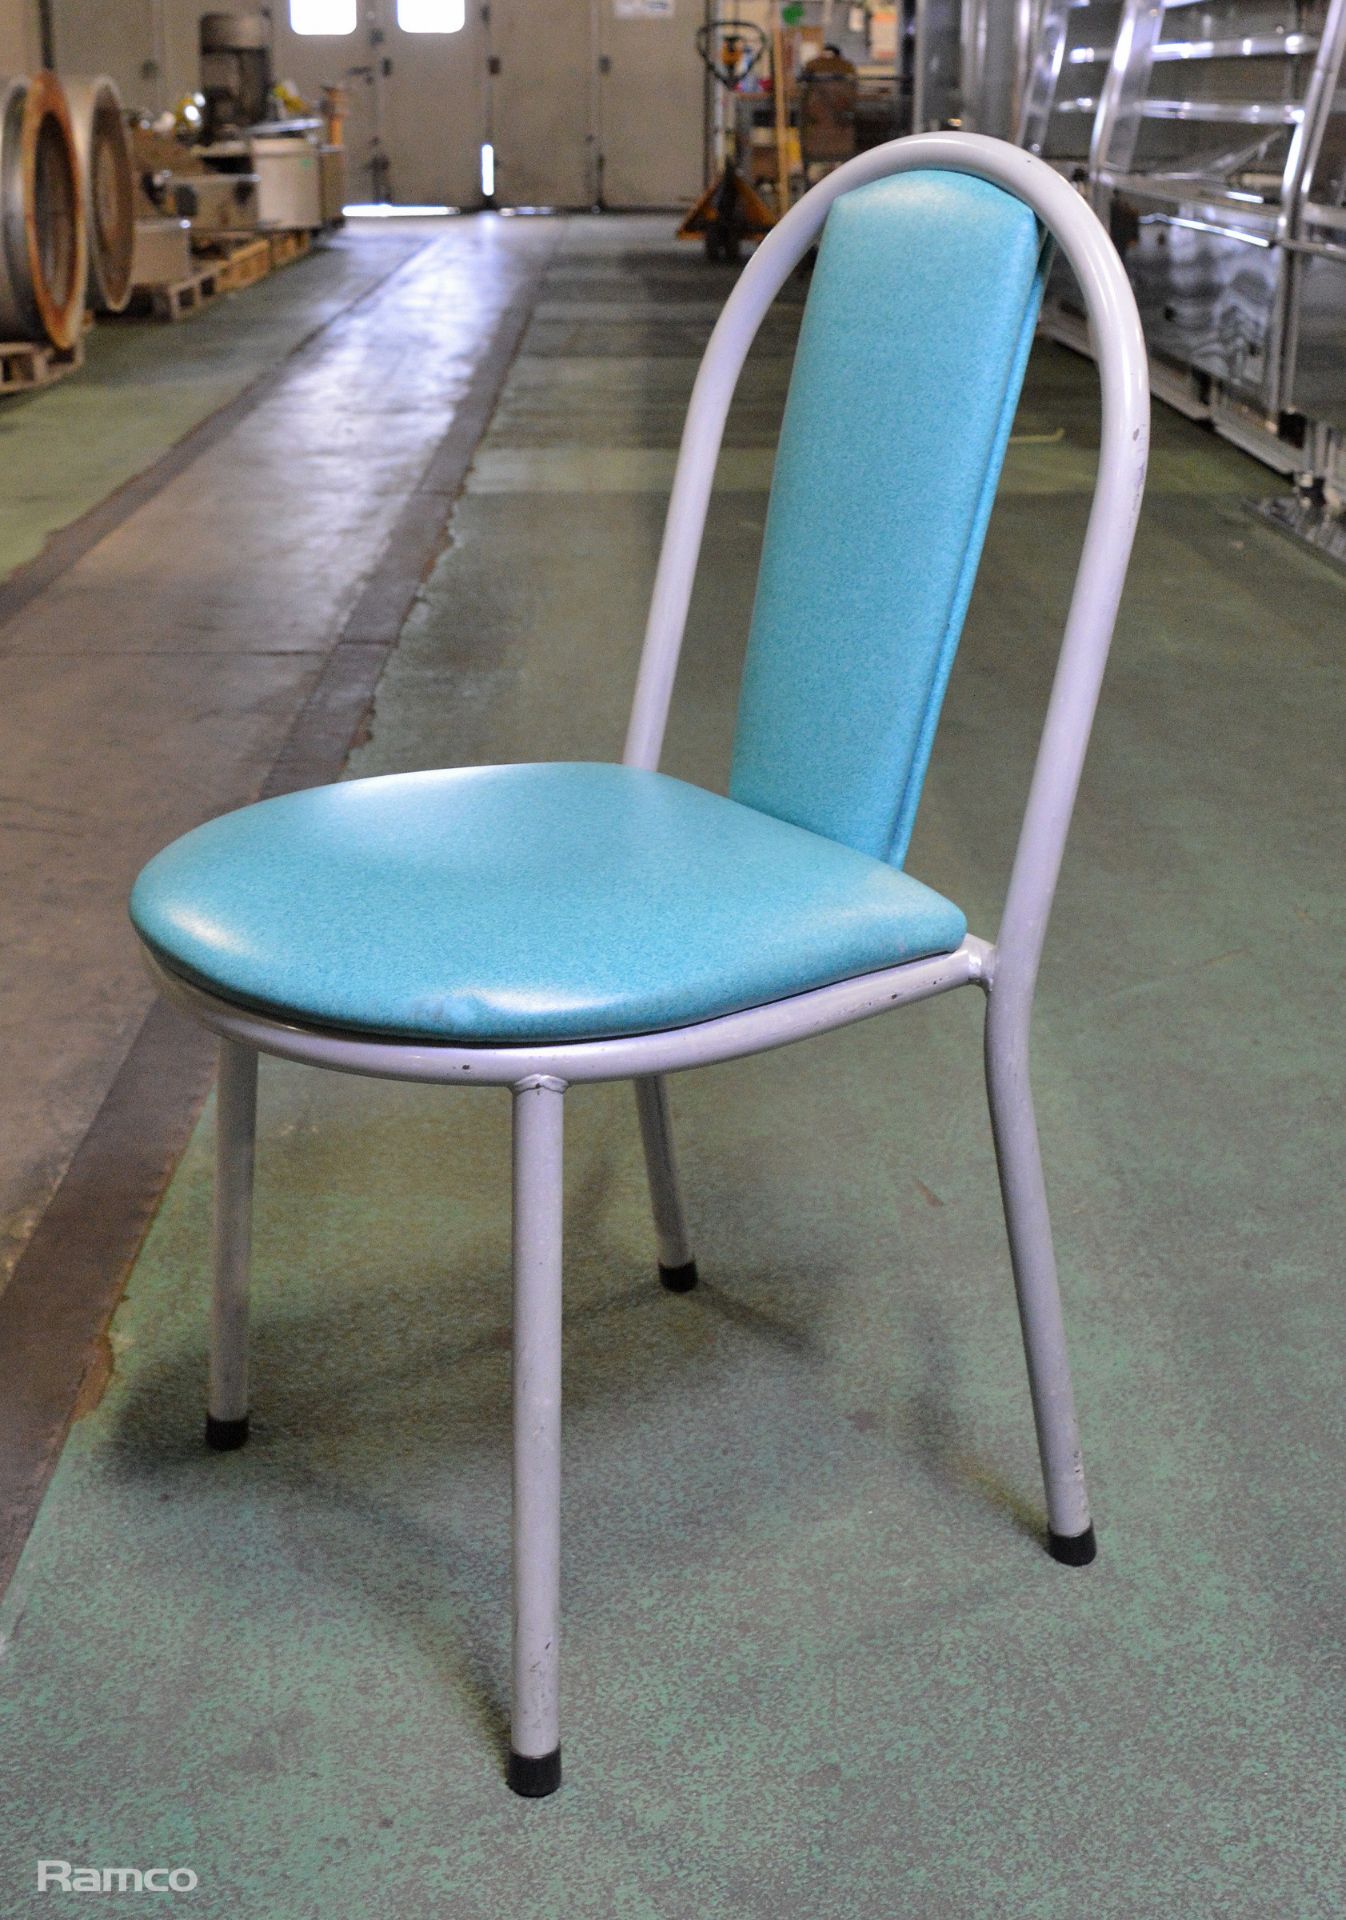 24x Chair Gray Metal Frame with green Padded Seats - Image 3 of 5